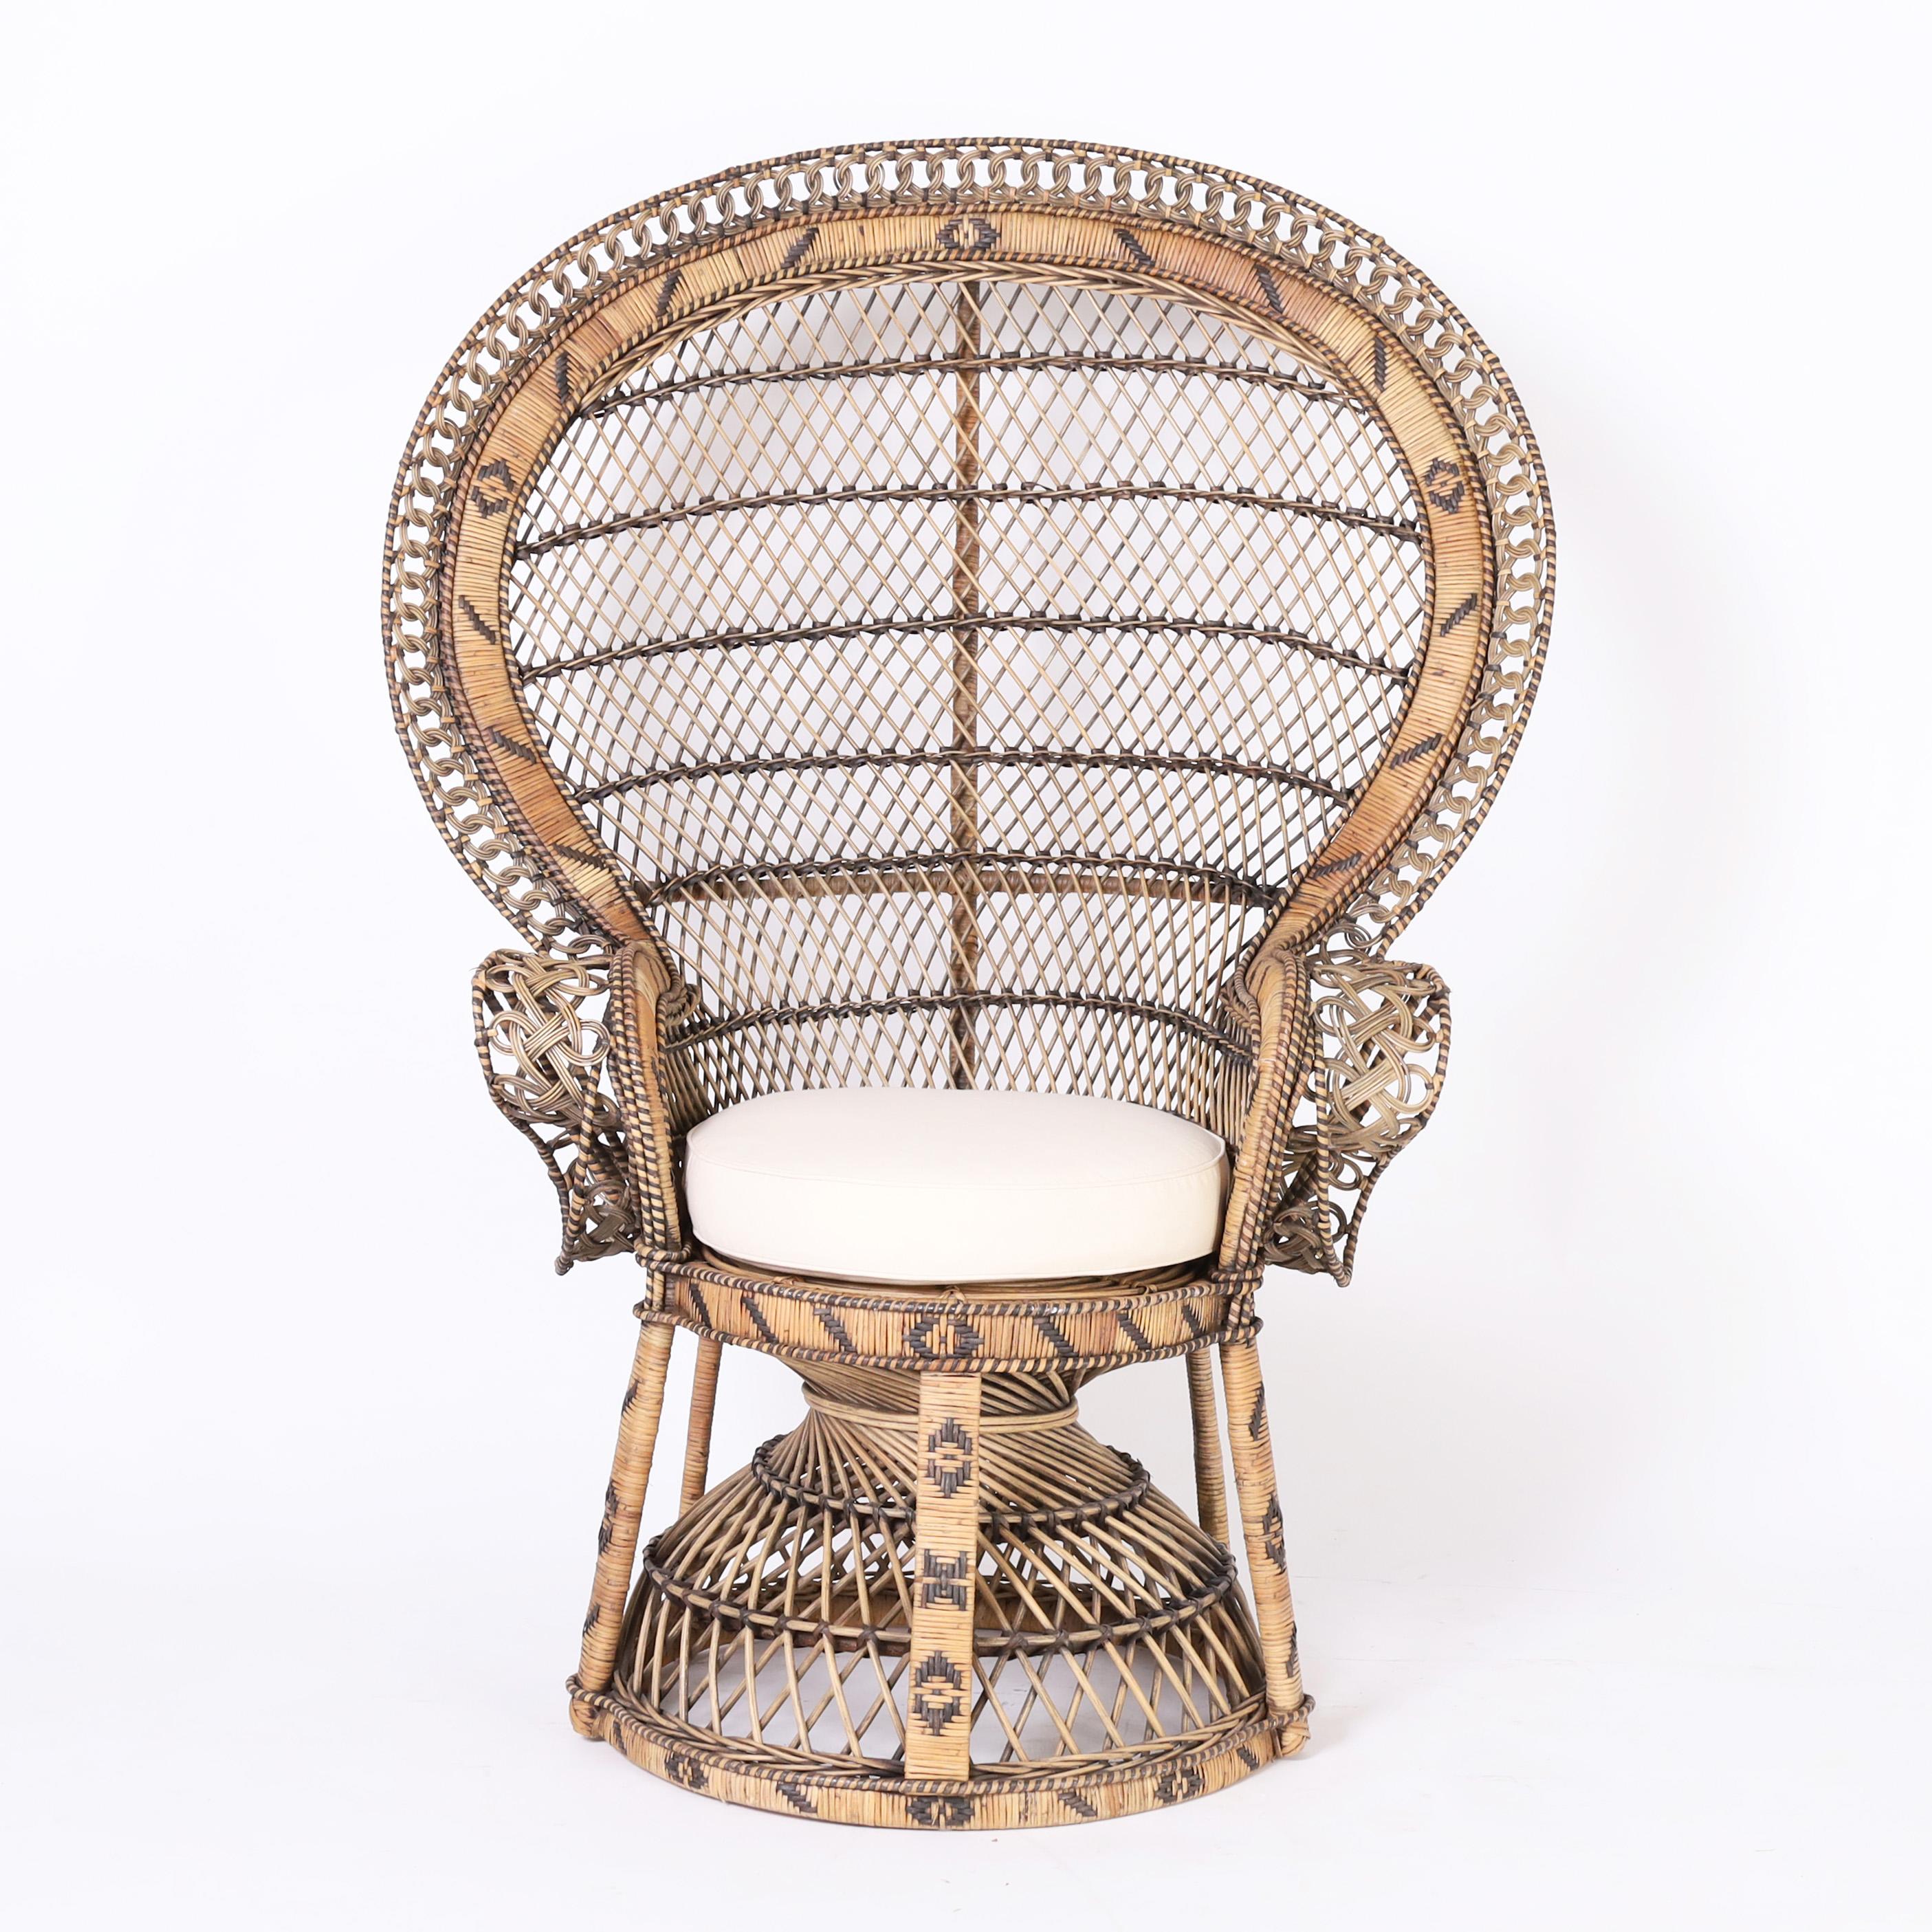 Impressive pair of Anglo Indian peacock chairs, ambitiously handcrafted in wicker and rattan in classic style and decorated with painted rattan in geometric designs. 